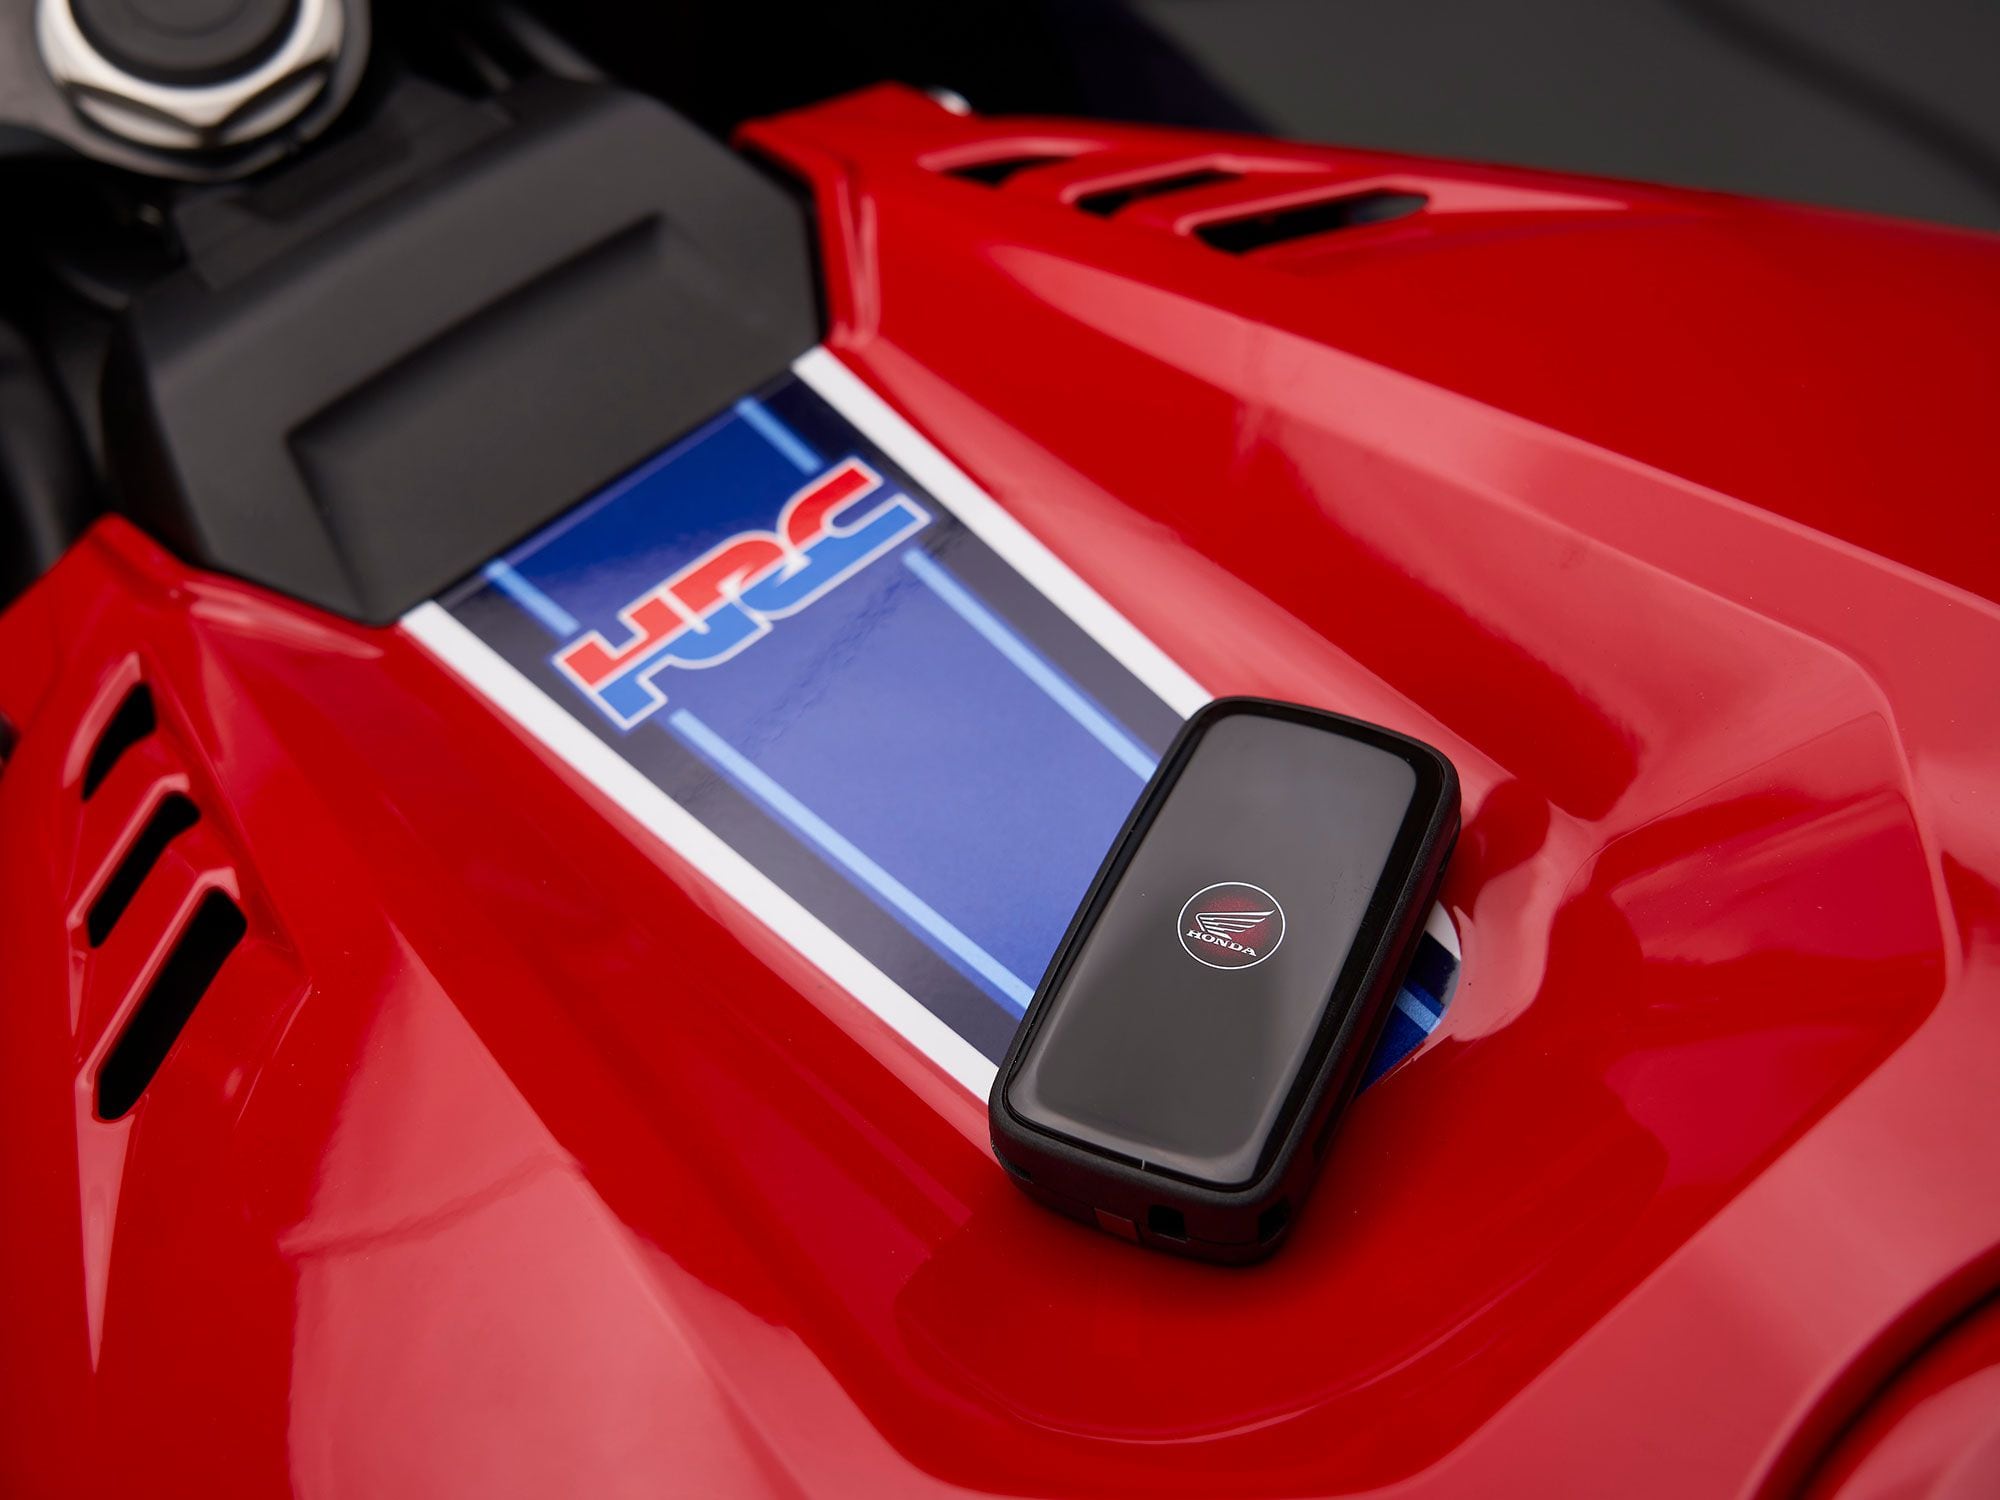 The Fireblade ditches the traditional key for a remote fob, which can become a nuisance. Pro tip: don’t walk away for a photo stop with the ignition left on!